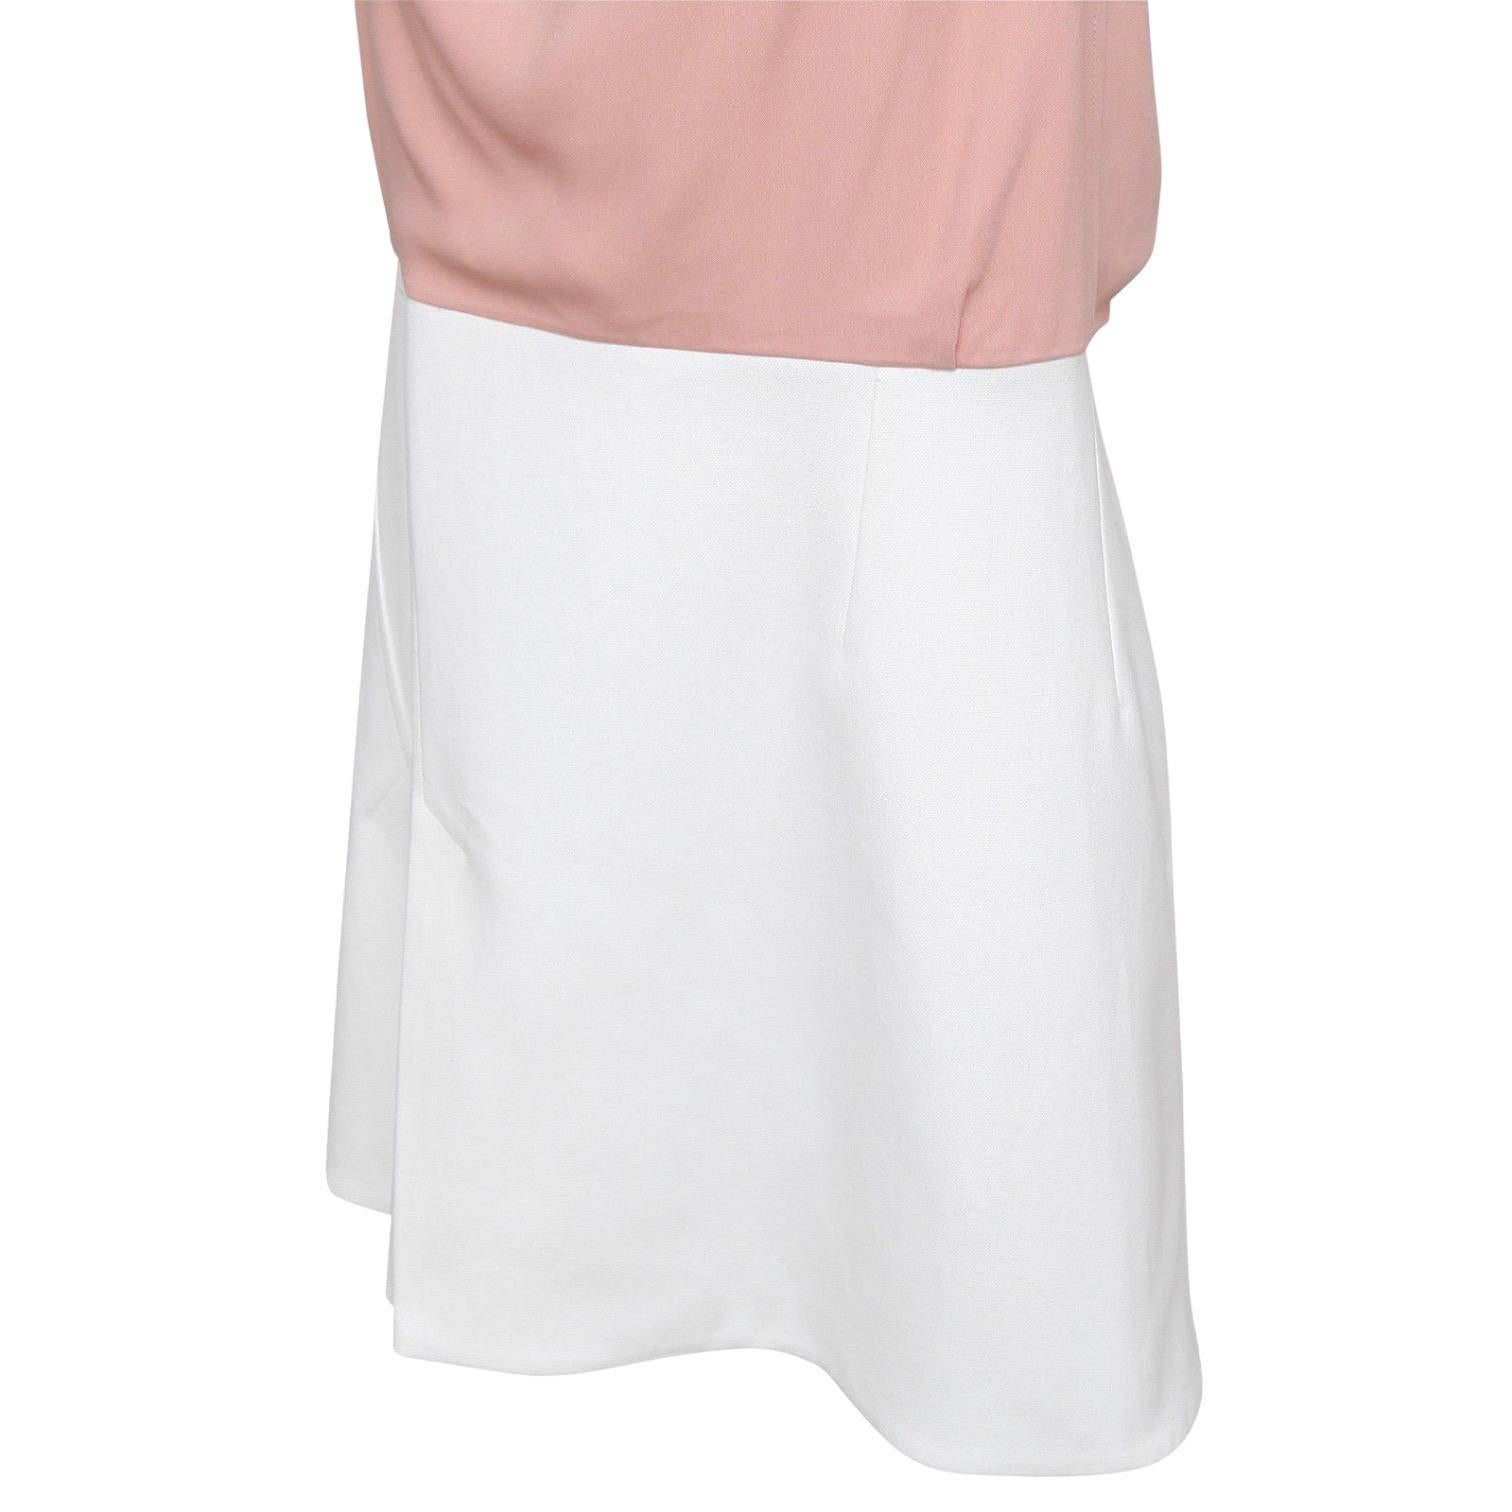 ROLAND MOURET Sleeveless Dress Cowl Neck 2016 PAGET White Pink 14 BNWT $1230 For Sale 2